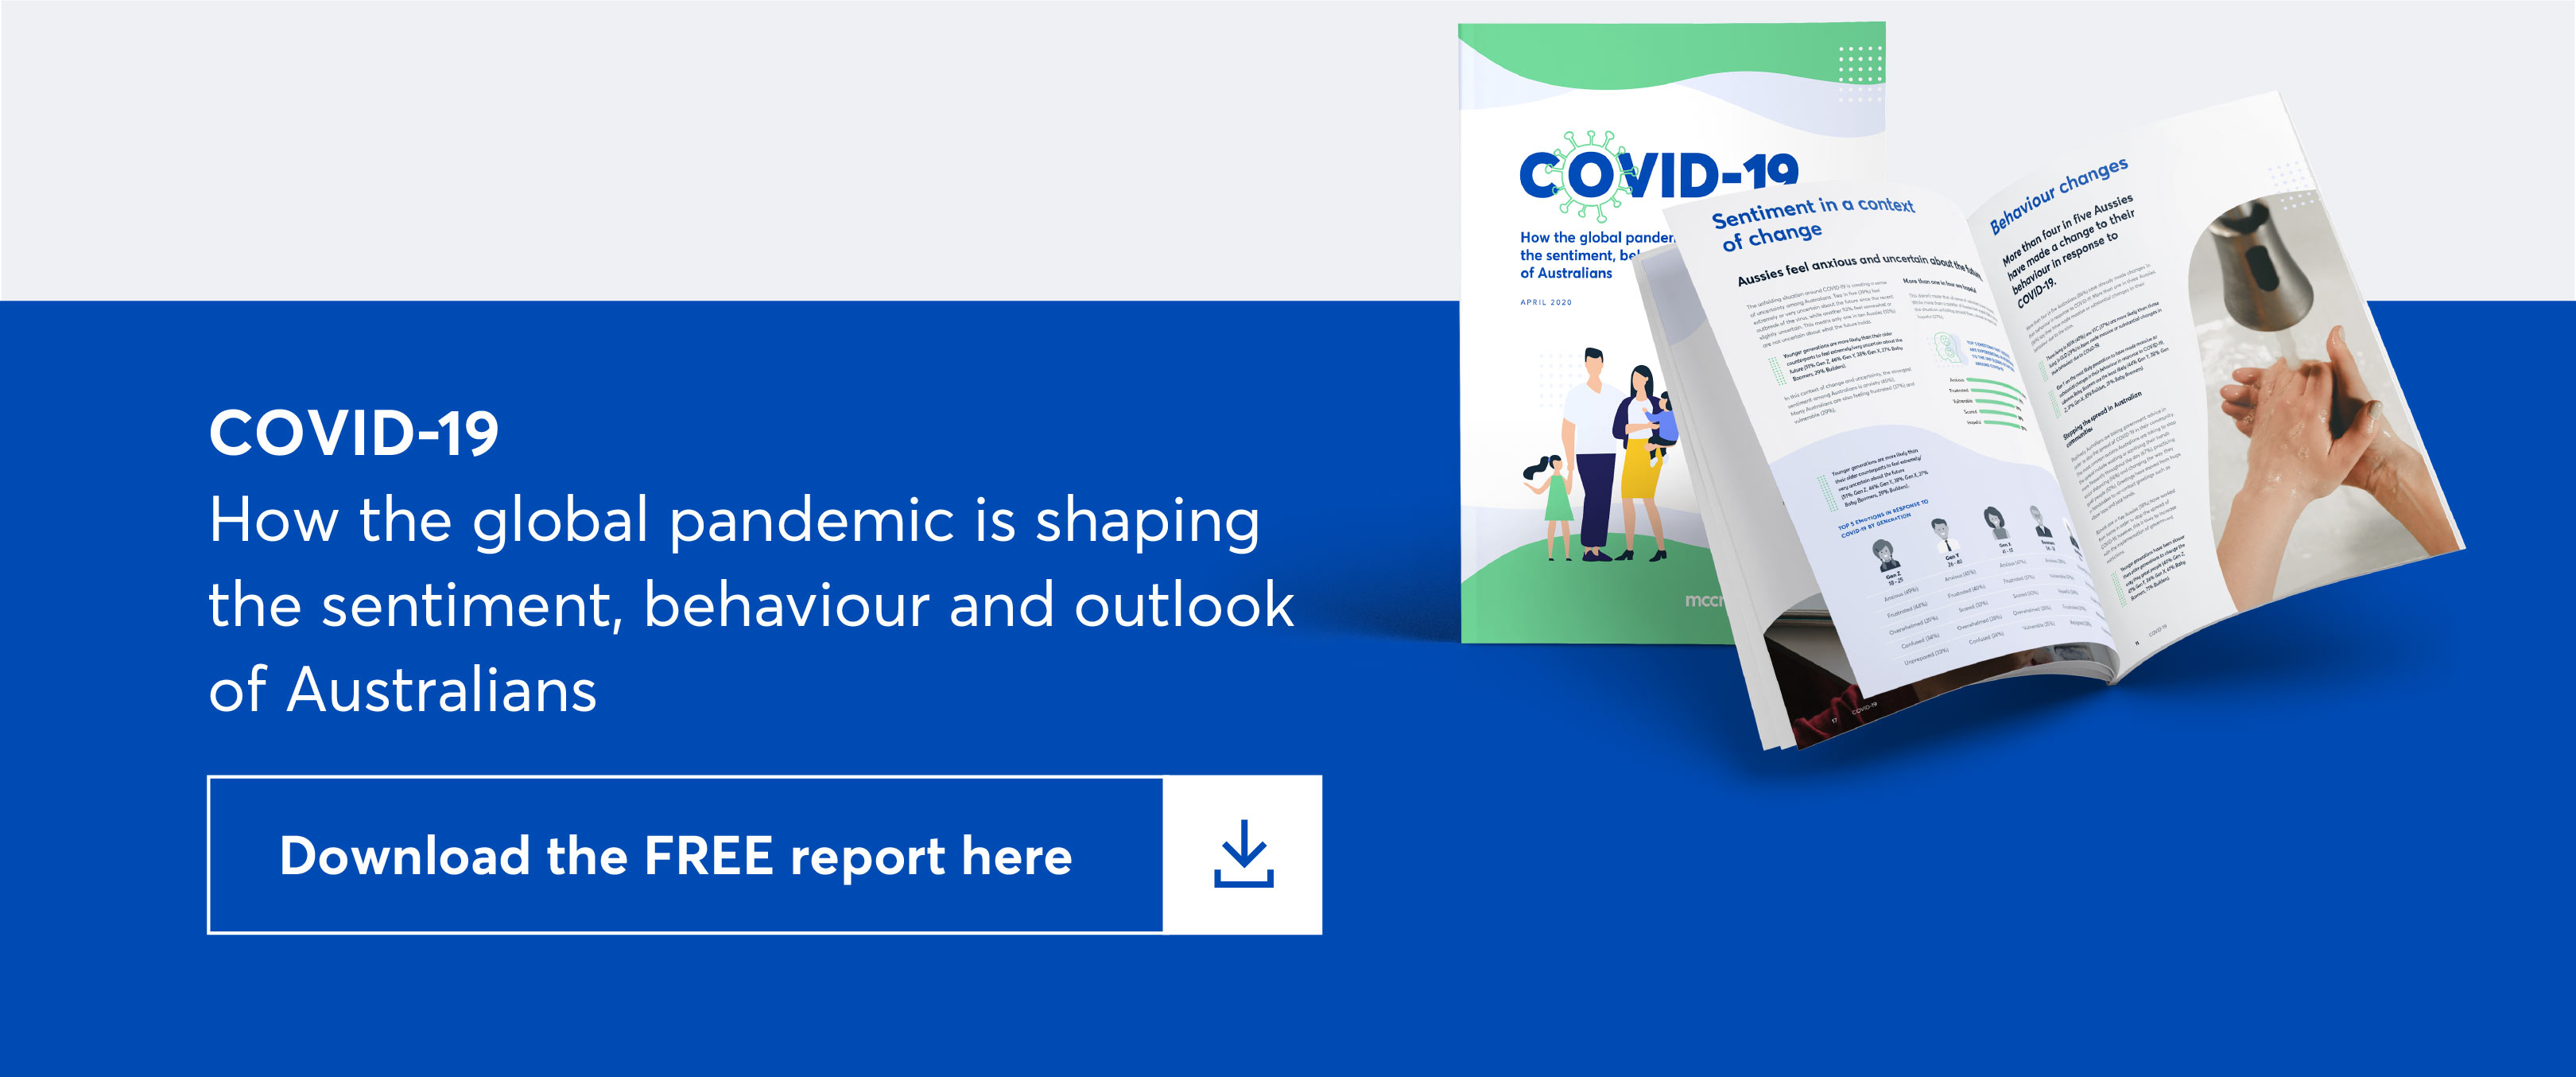 Download the report on COVID-19